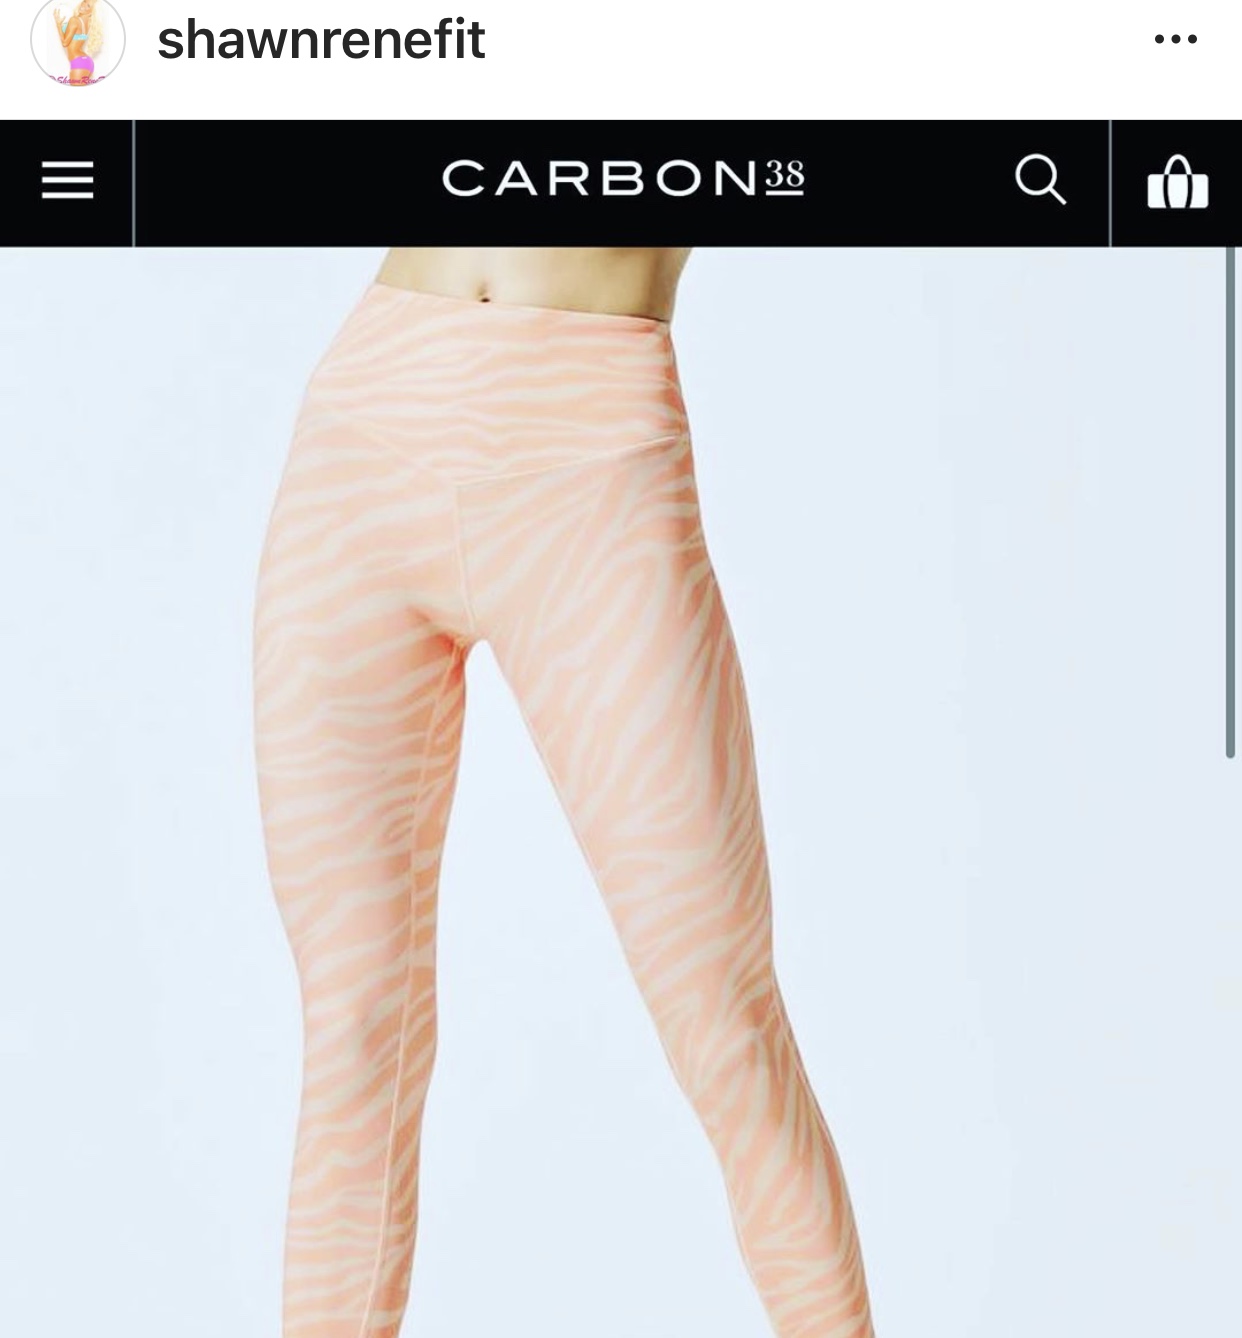 Carbon38 promo code shawn rene zimmerman fitness active Forbes vogue fashion style summer 2020 June 2020 discount codes Ballet barre yoga workout clothes running dance fashion style 